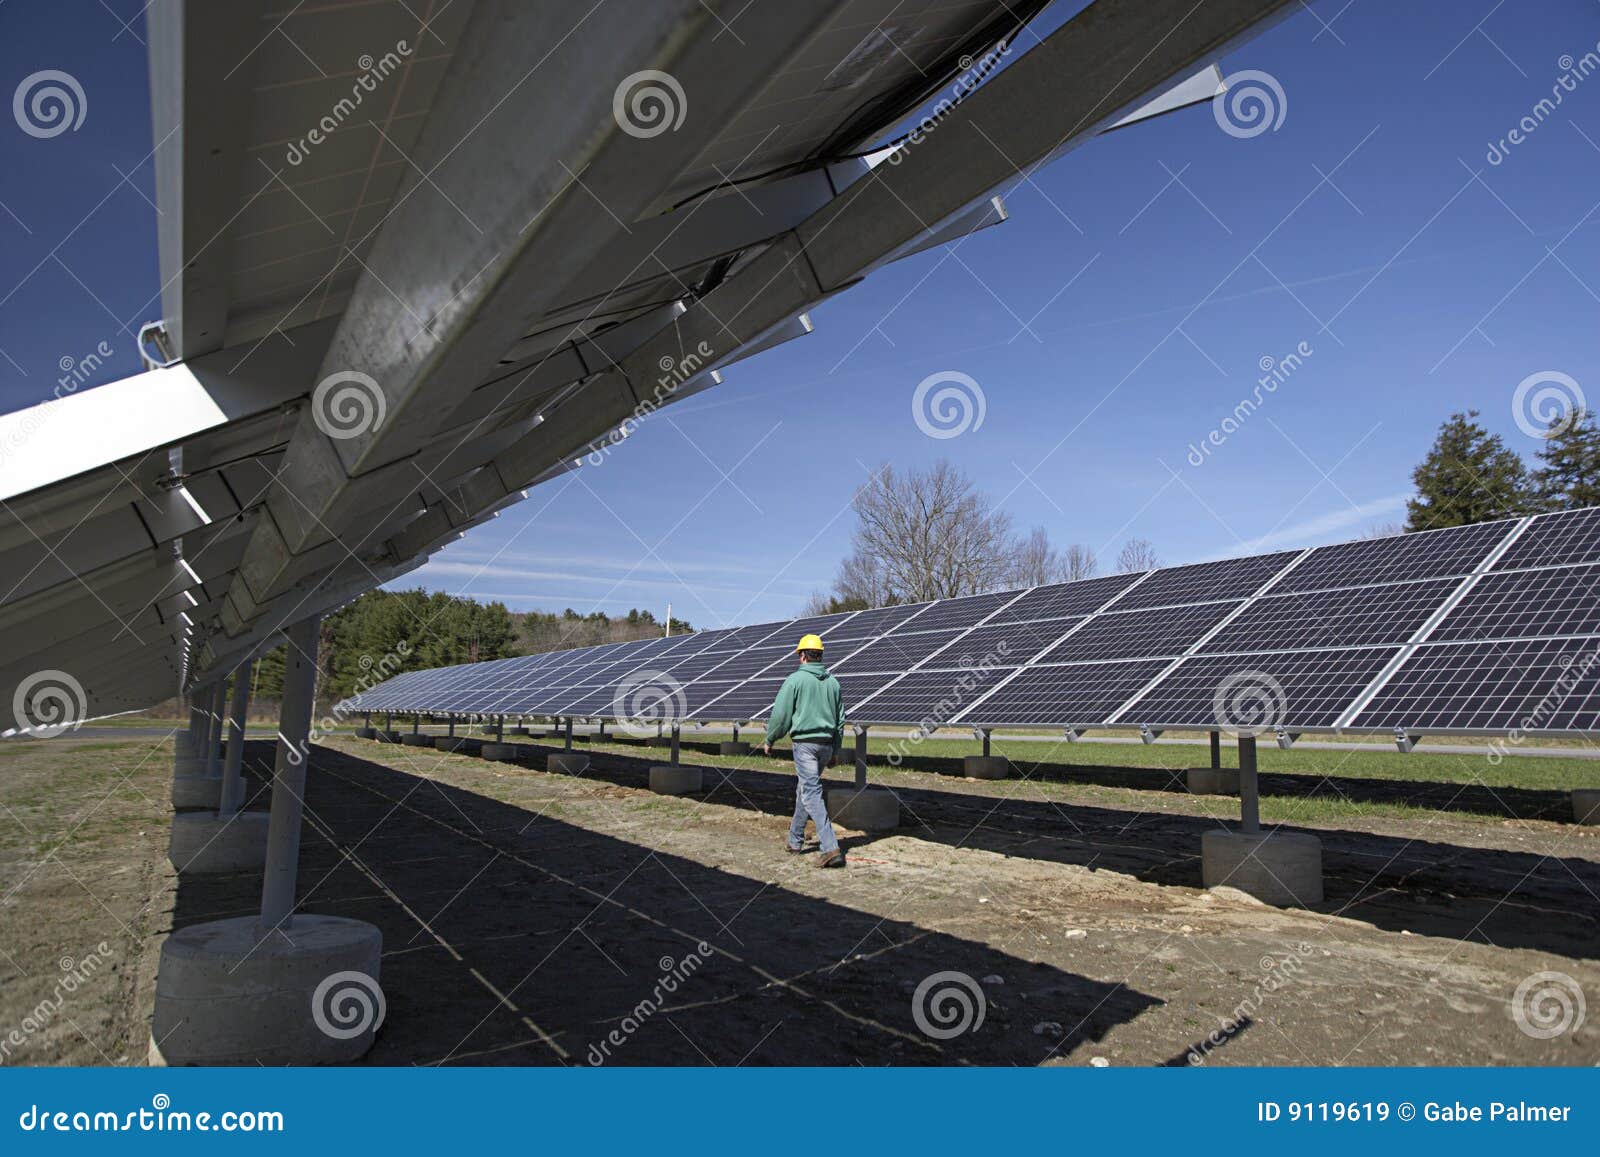 solar panels inspected by workman